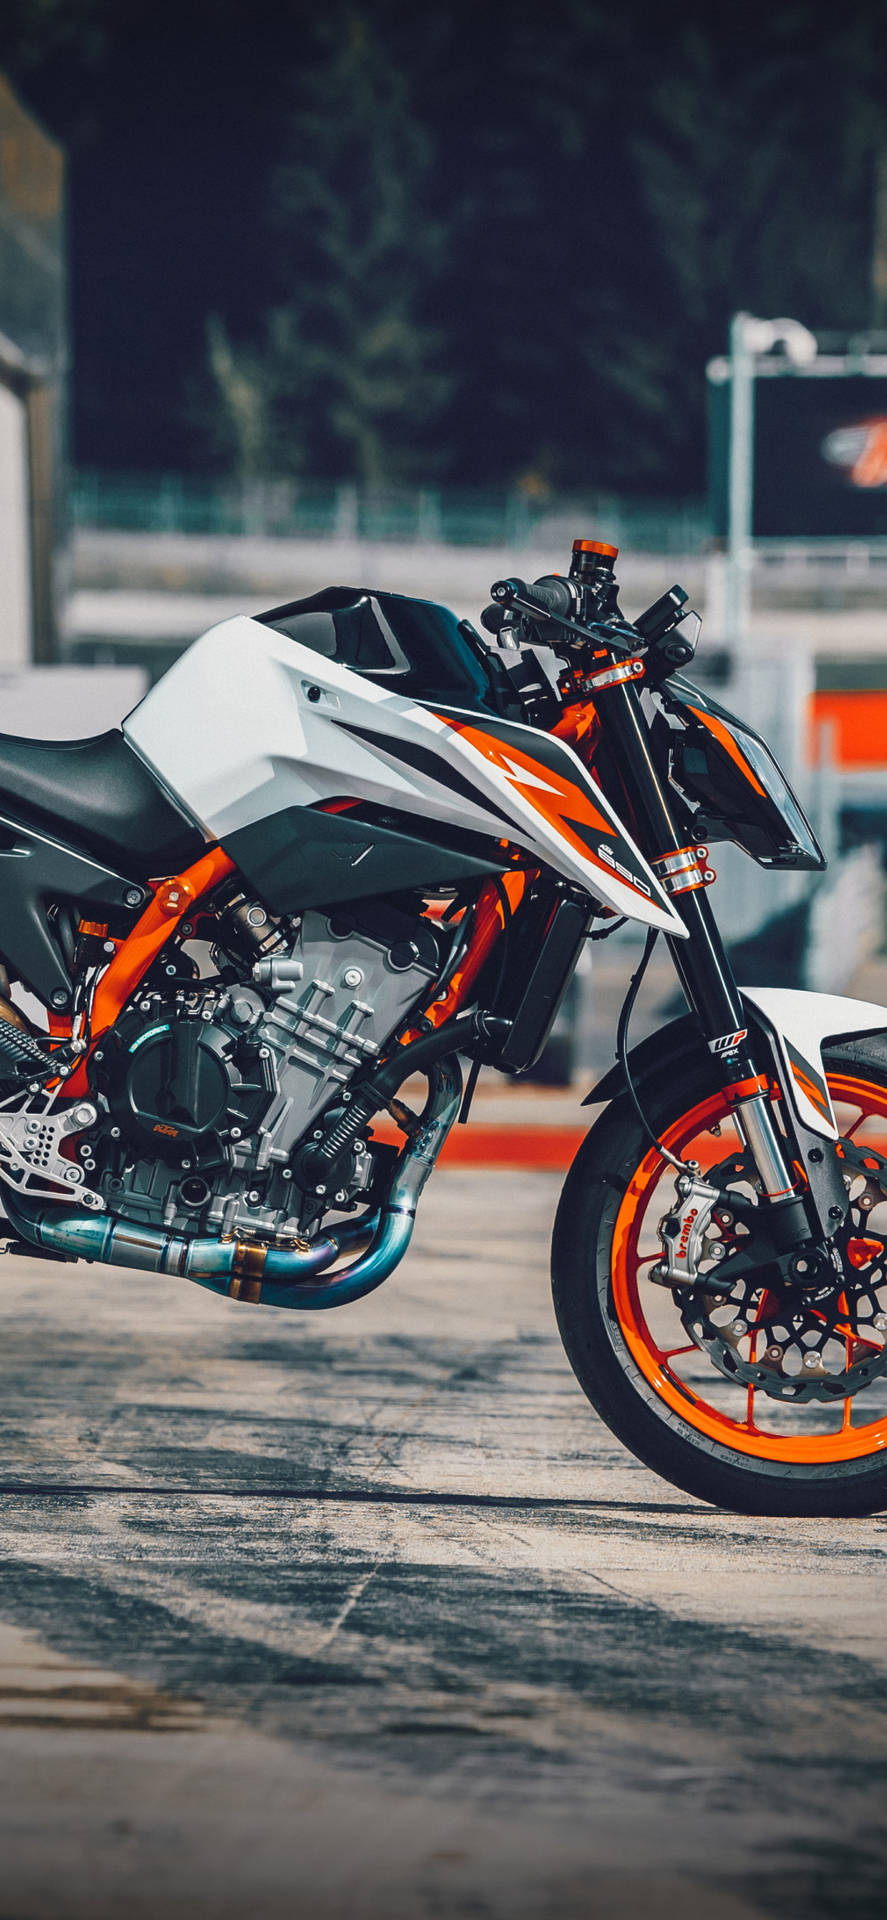 Parkedwhite Ktm Iphone Could Be Translated To Italian As 